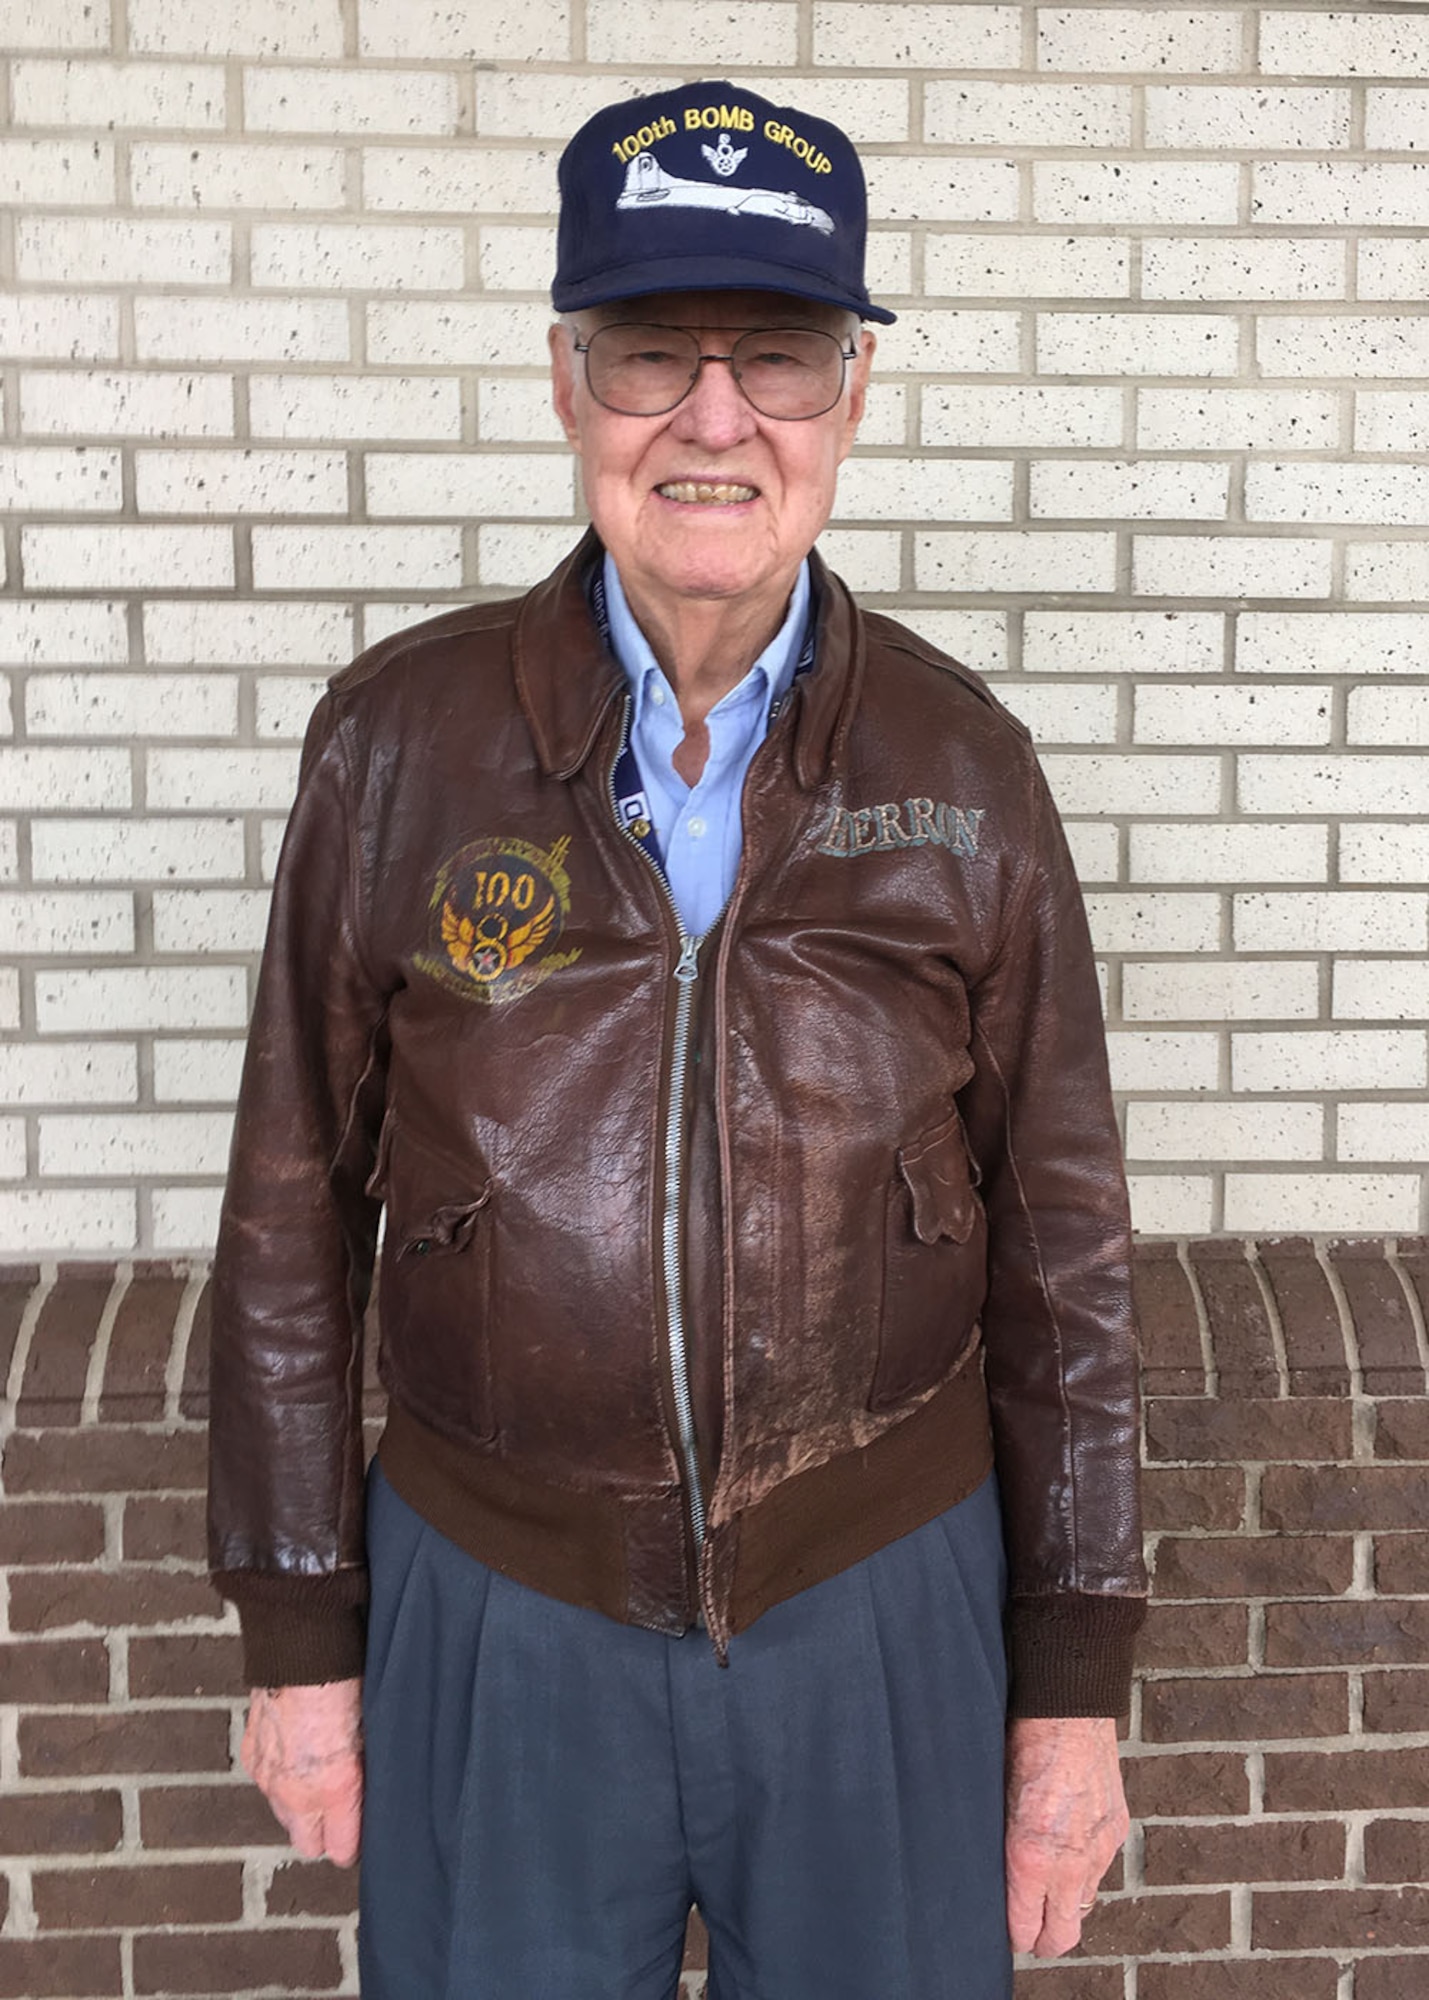 Lewis Herron, 100th Bombardment Group veteran and former staff sergeant with the 350th Bomb Squadron at Thorpe Abbots, England, during World War II, poses for a photograph April 20, 2016, in North Carolina, USA. Herron was a tail gunner on “Heaven Sent,” a B-17 Flying Fortress. The heritage of the 100th Air Refueling Wing began with the 100th BG and the Bloody Hundredth. (Courtesy photo by Timothy McGinnis/Released)